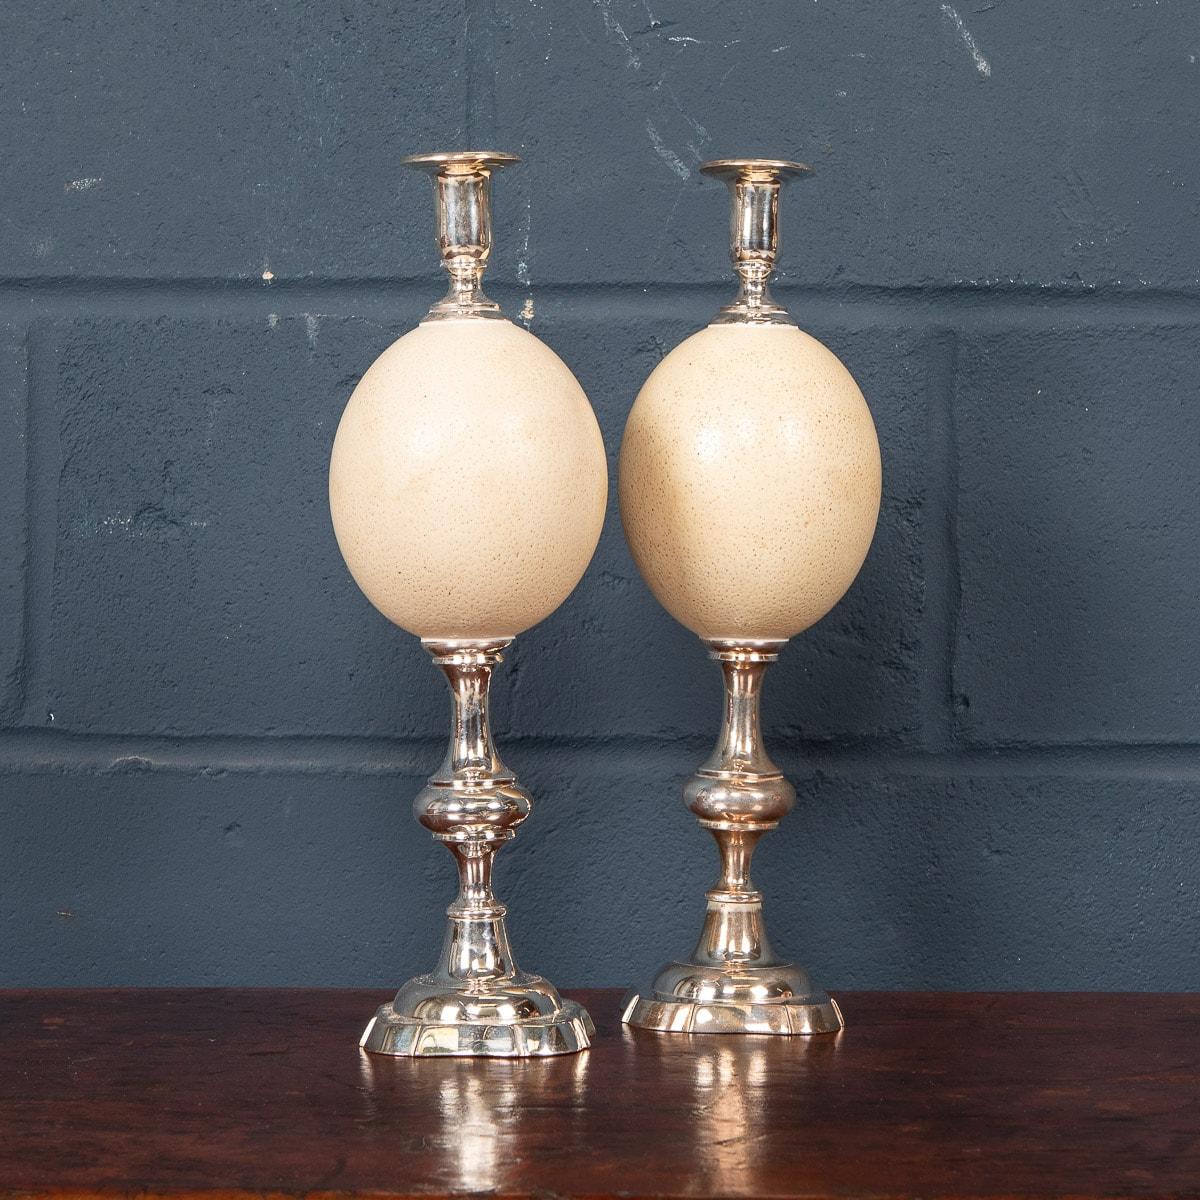 An unusual pair of silver plated candlesticks fashioned with an ostrich egg body, mid 20th century. A wonderful piece of design for anyone interested in natural history and a great addition to any room.

CONDITION
In good condition - wear and